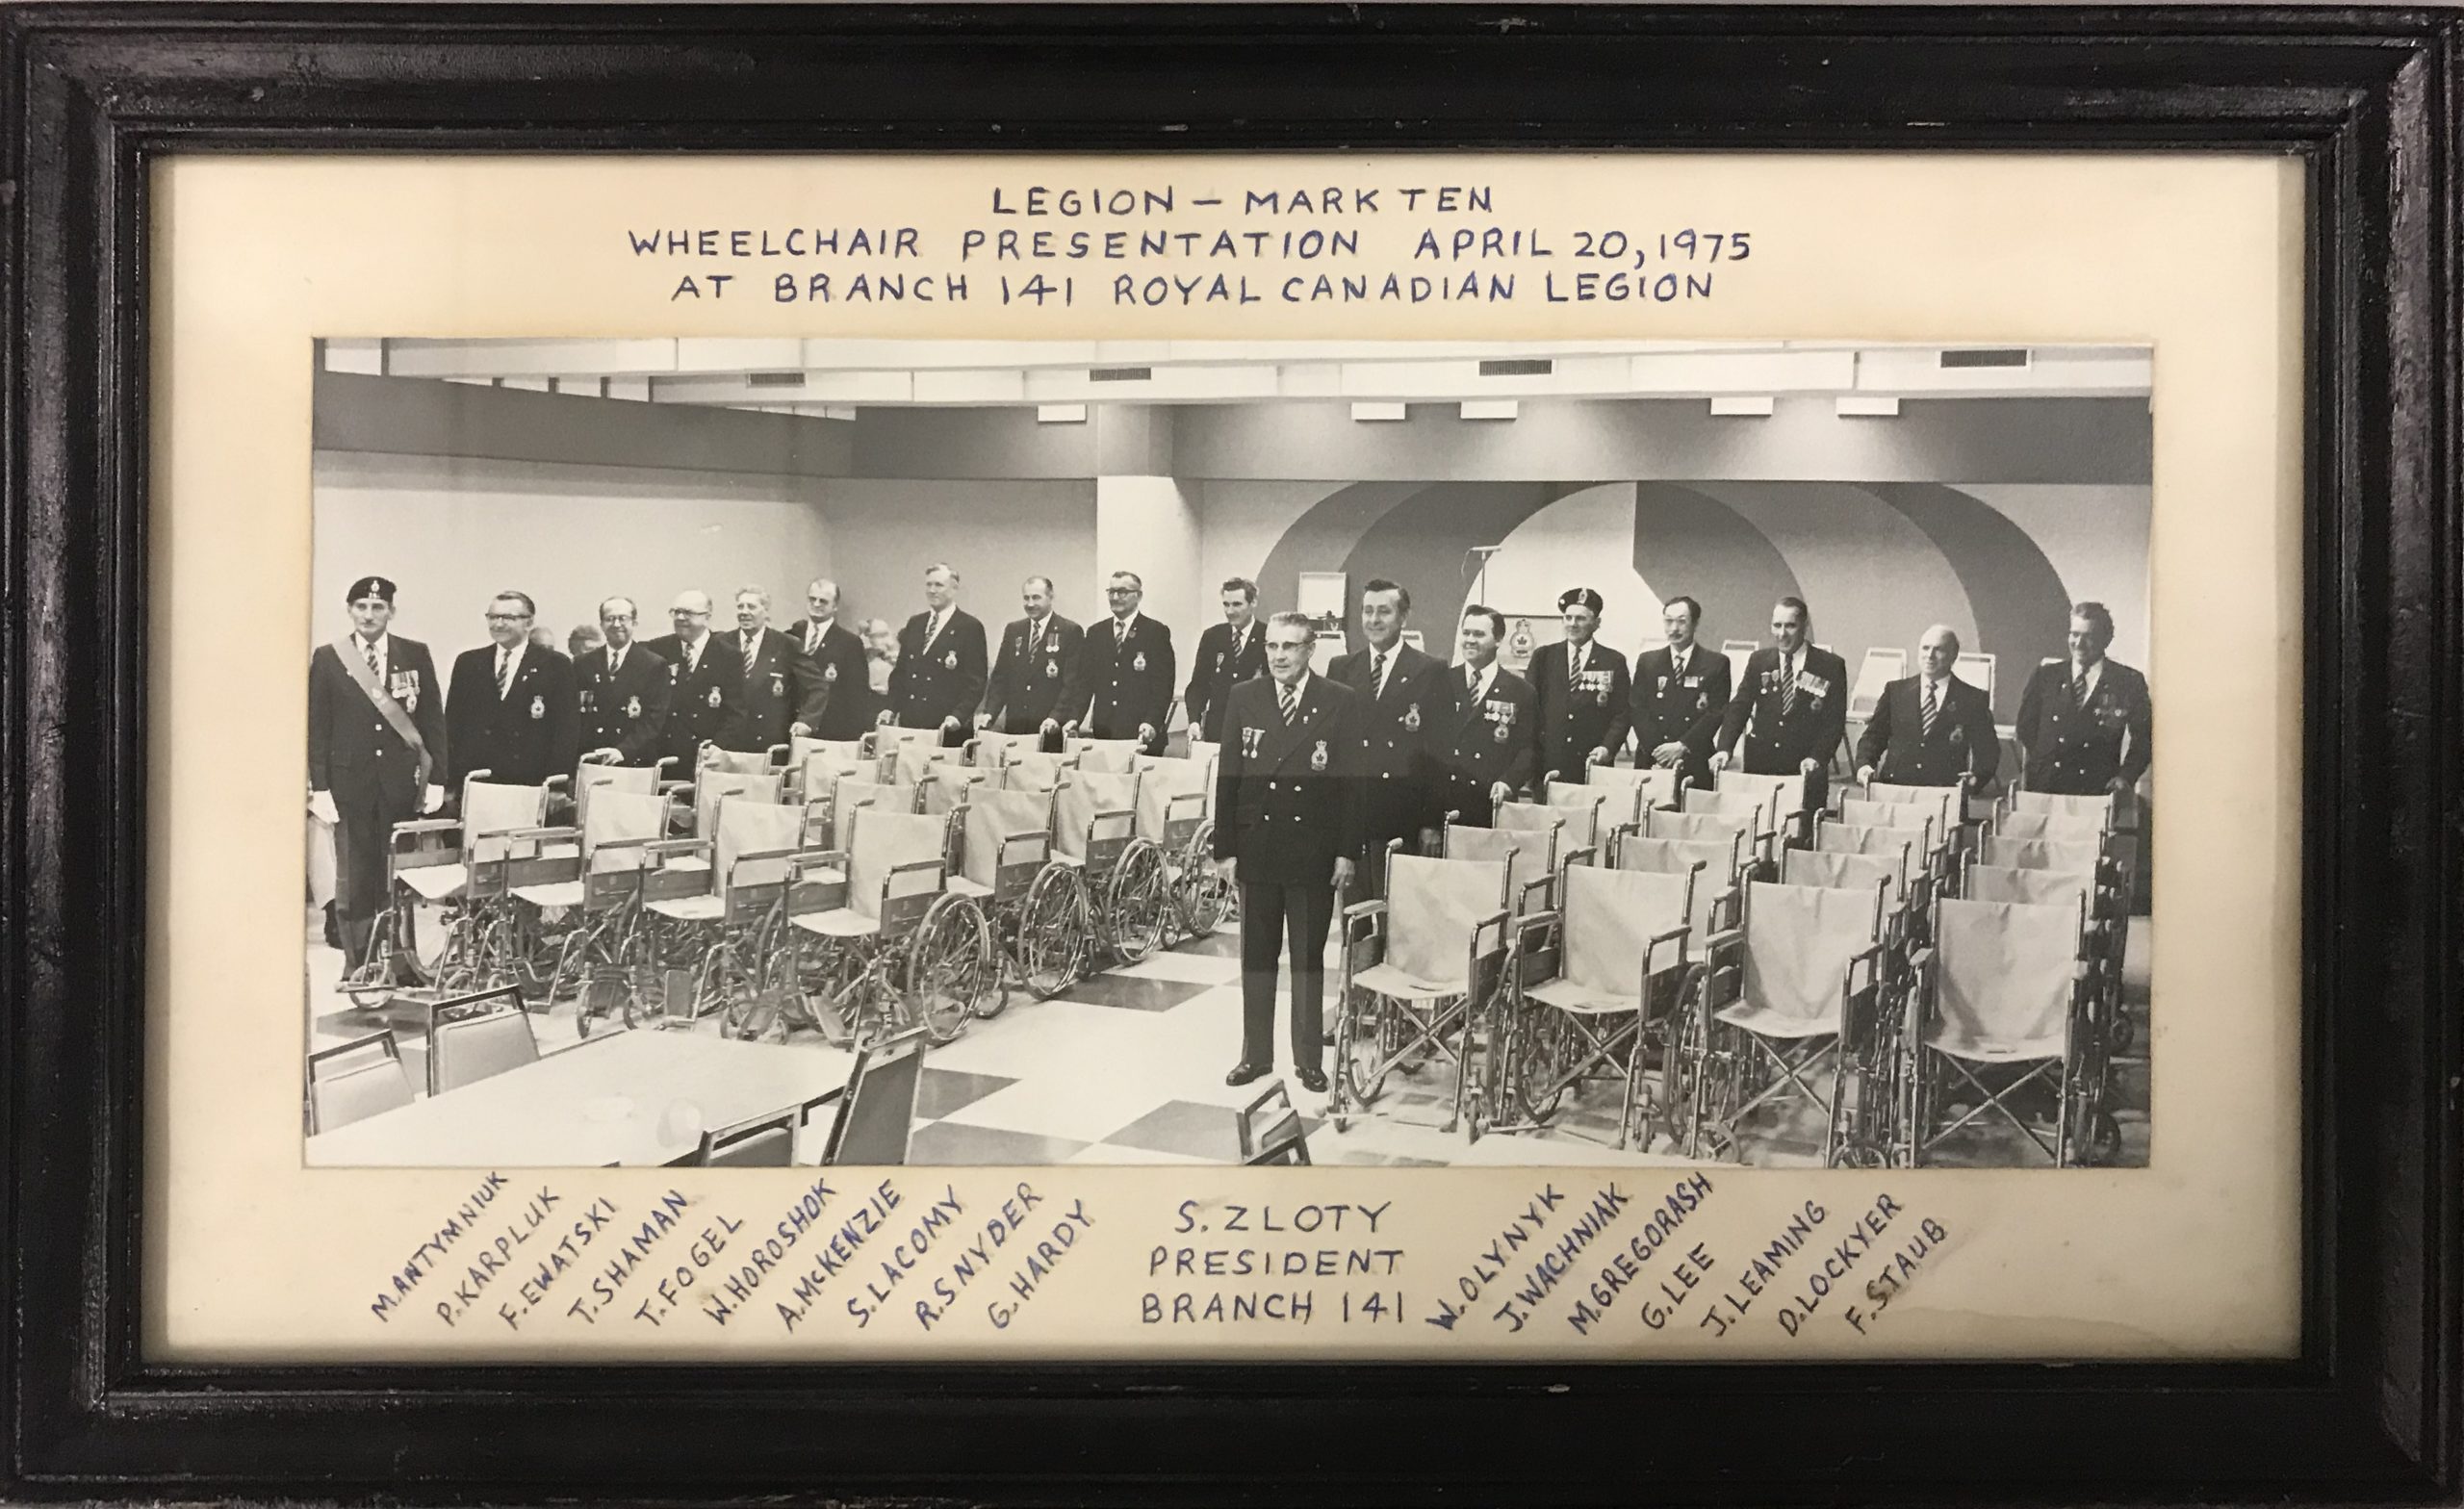 A framed black and white photograph showing a group of uniformed men standing alongside neatly lined up empty wheelchairs. Written on the frame surrounding the photo, writing reads, “Legion - Mark Ten / Wheelchair Presentation April 20, 1975 at Branch 141 Royal Canadian Legion.” Written along the bottoms are the names of those pictured including S. Zloty, President Branch 141.